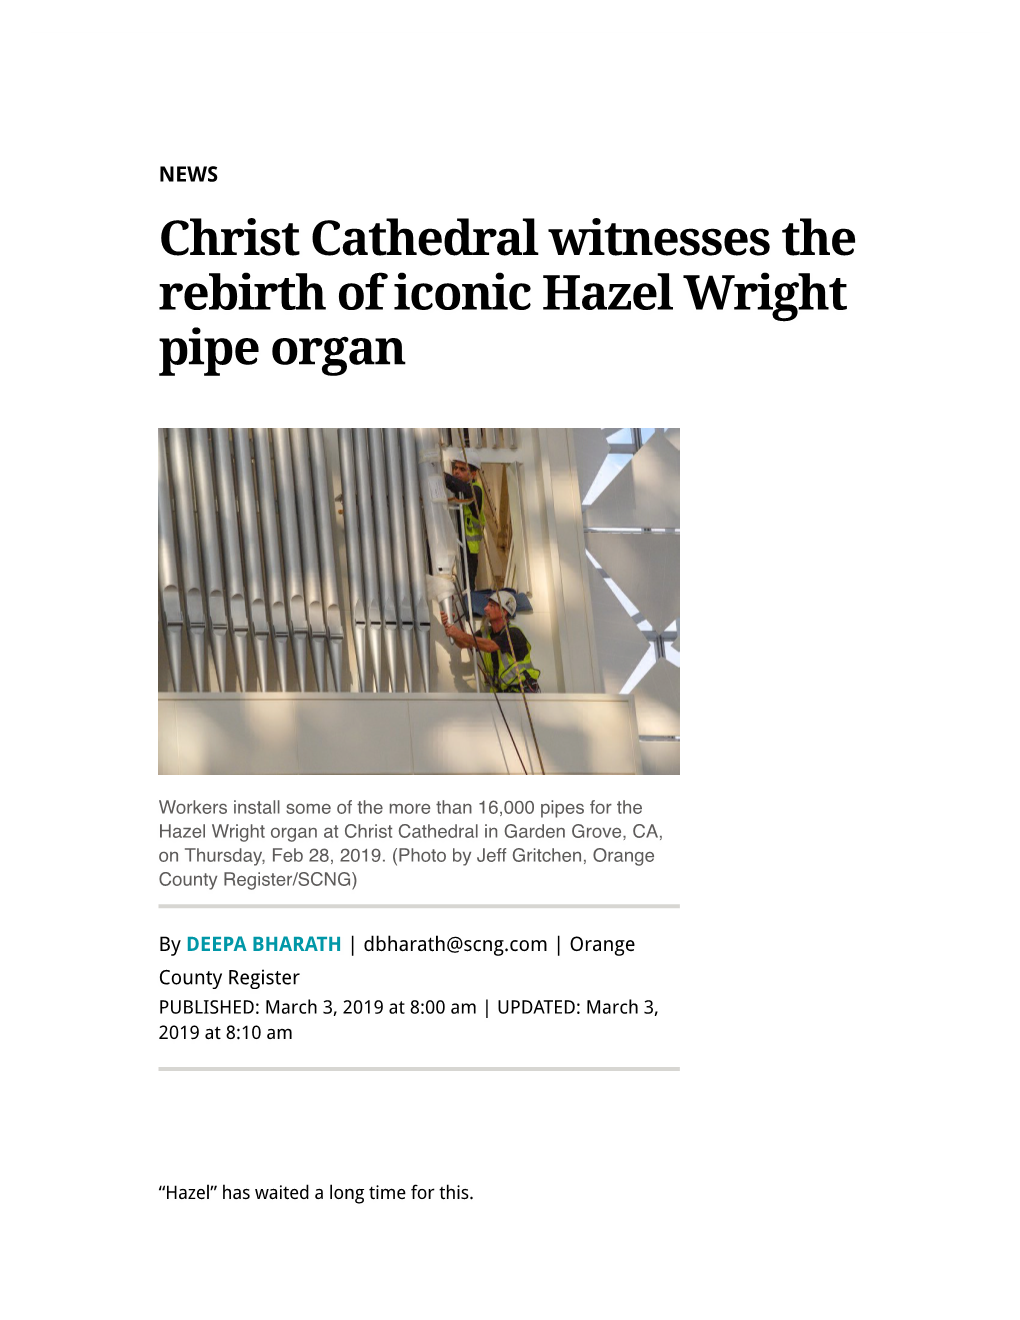 Christ Cathedral Witnesses the Rebirth of Iconic Hazel Wright Pipe Organ